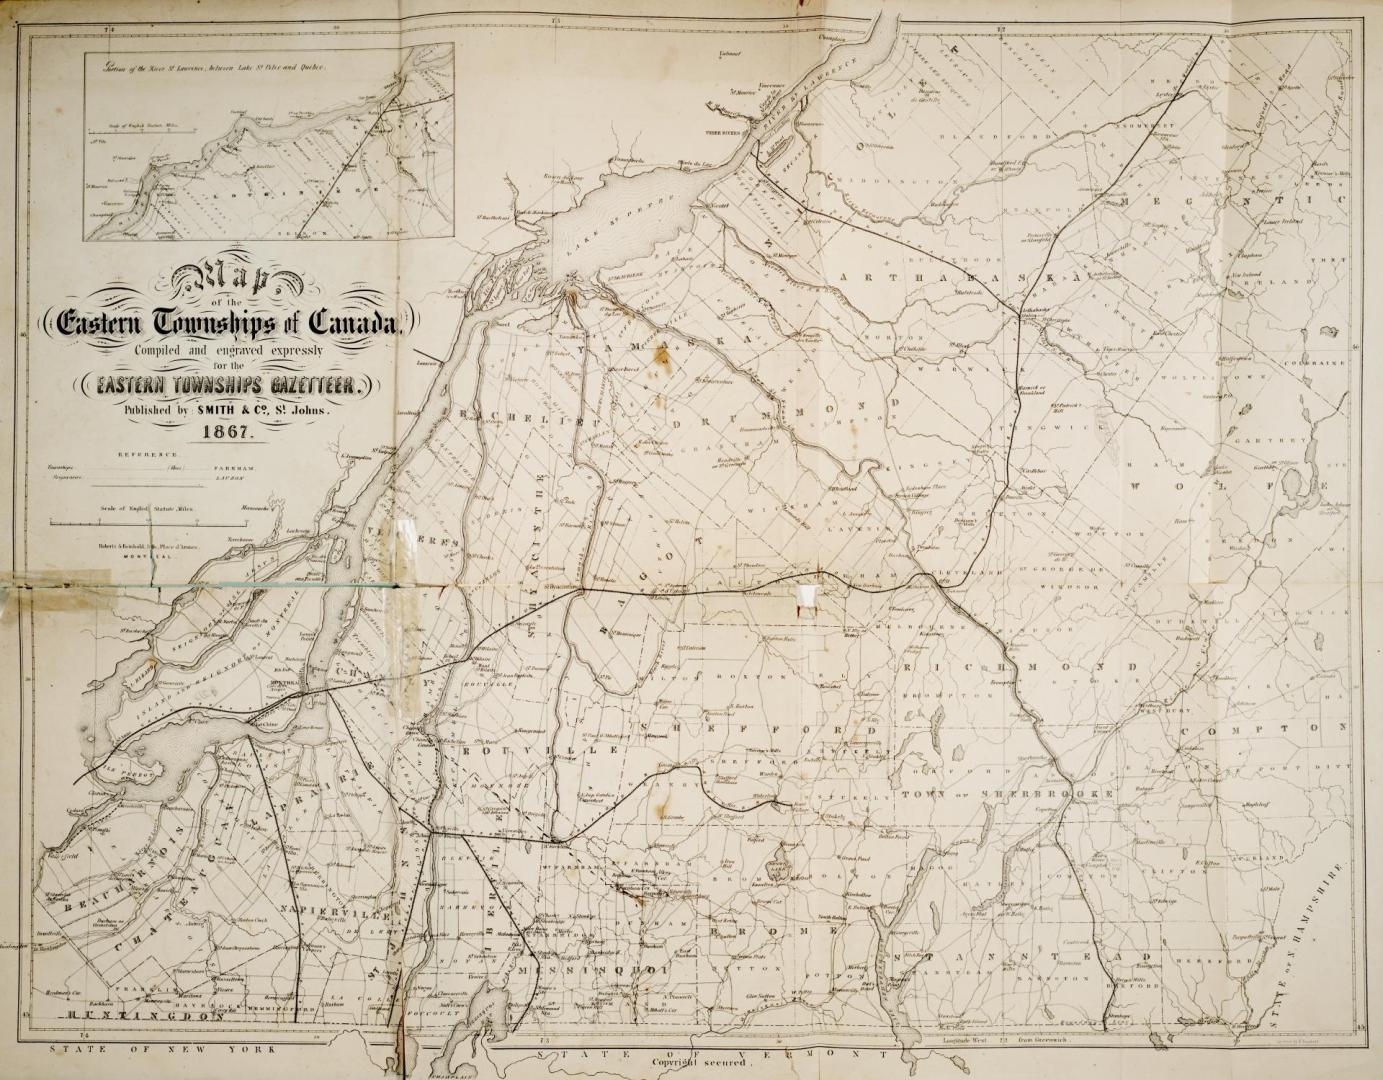 The Eastern townships gazetteer and general business directory and guide to the eastern townships of Canada containing also much useful information of a miscellaneous character